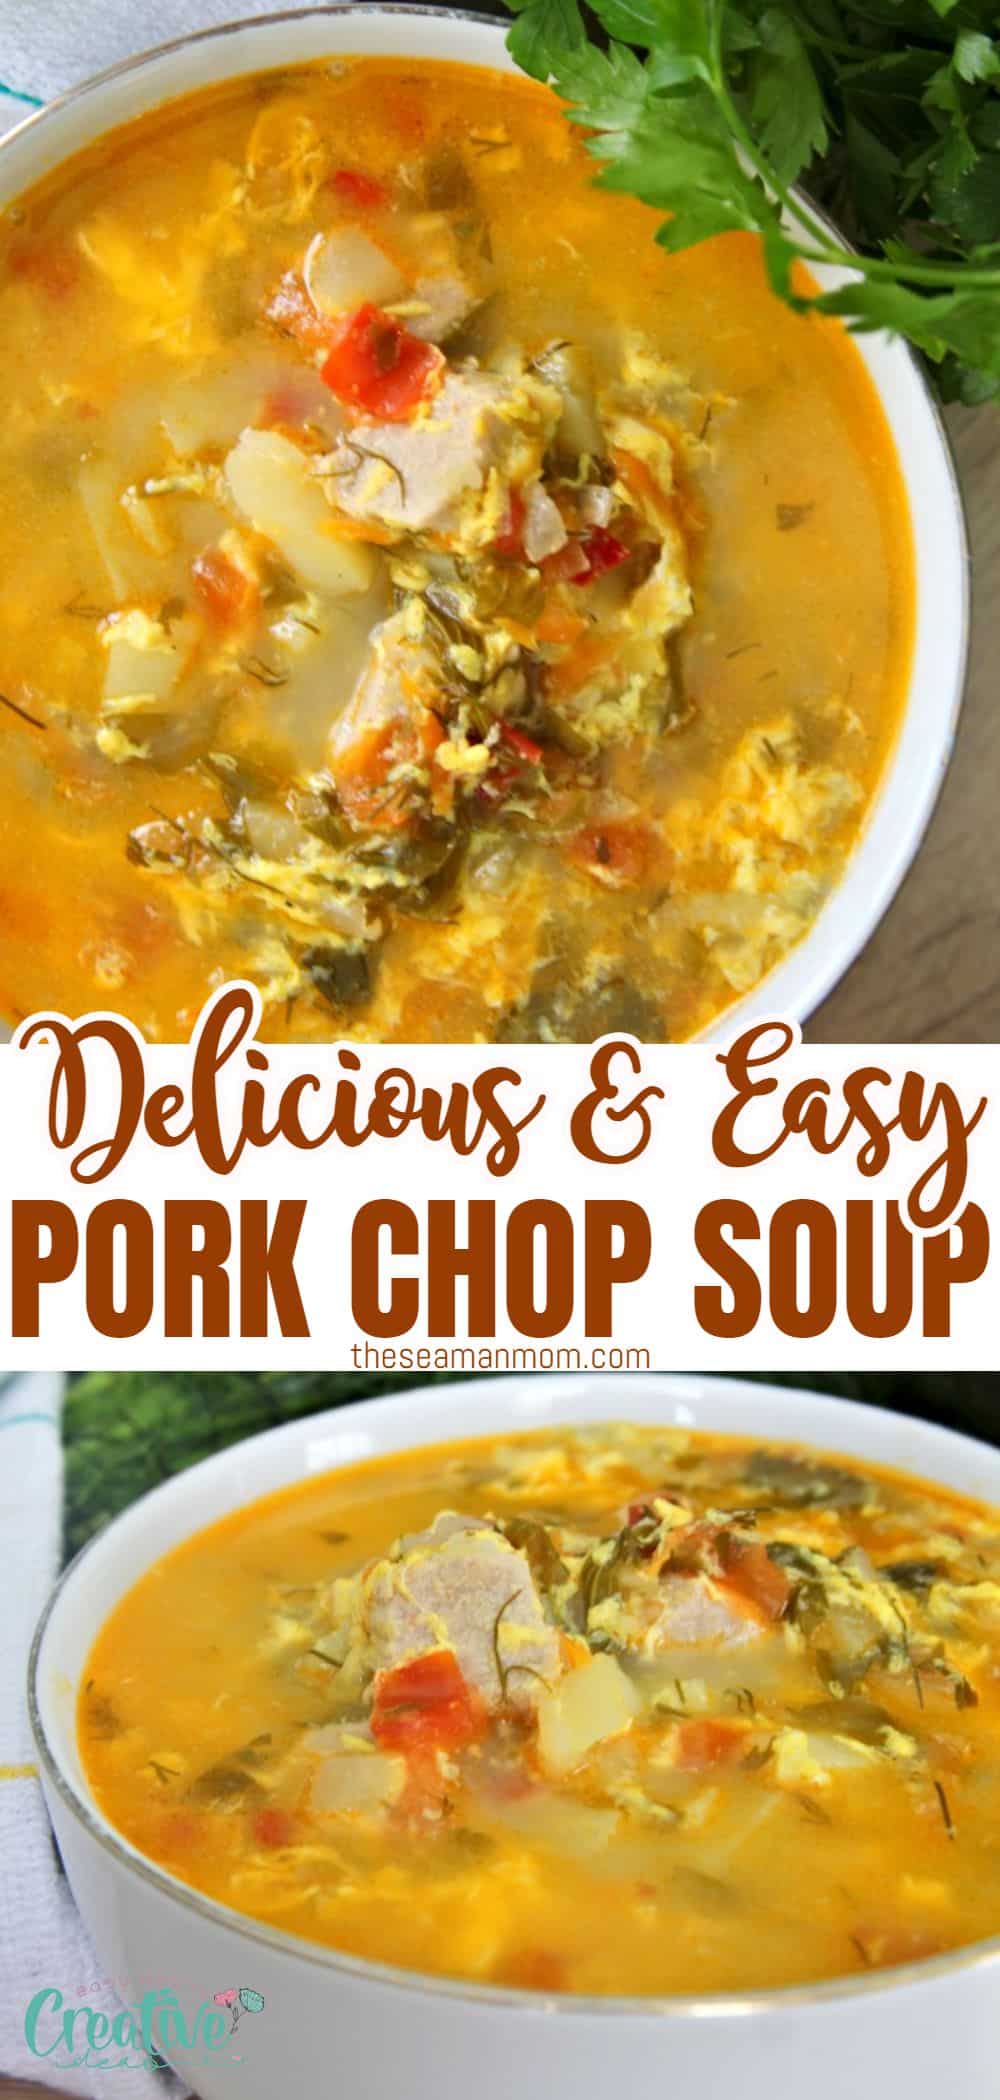 This pork chop soup is a nutritious dish packed with an abundance of vegetables, making it an excellent choice for a Sunday dinner. With its comforting flavors, this delightful pork soup can be prepared quickly and easily. via @petroneagu